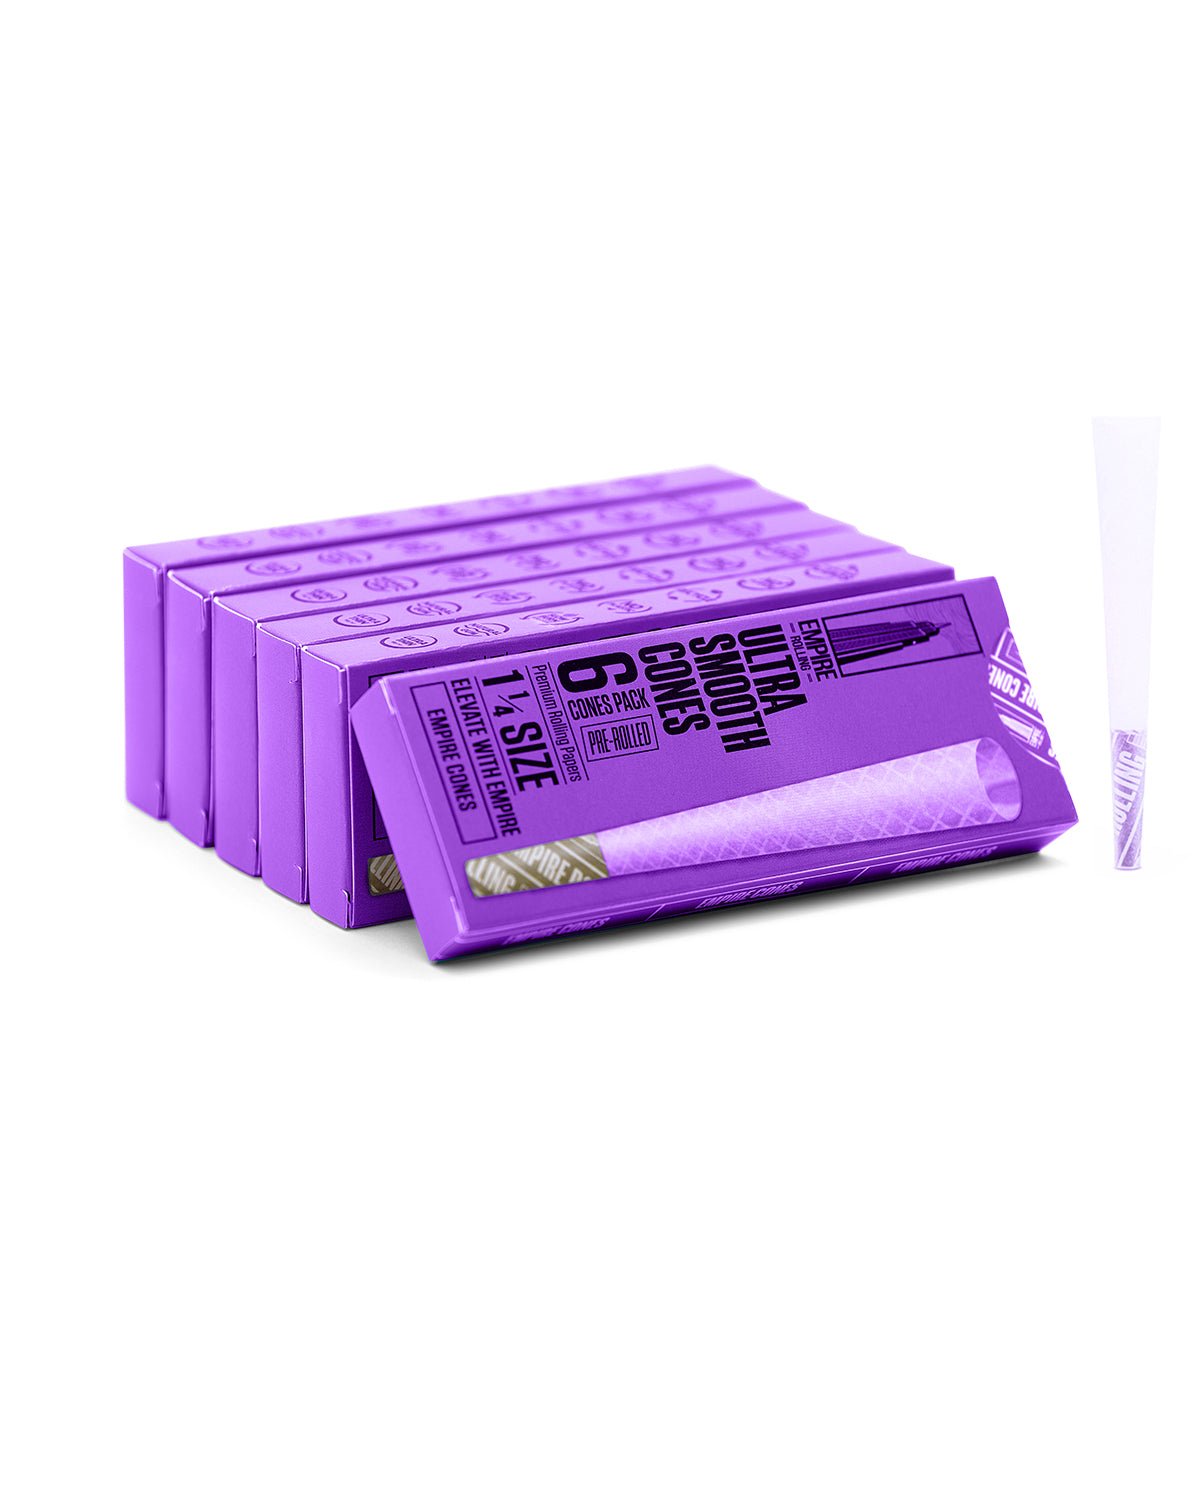 Empire Rolling's King Size Organic Hemp Rolling Papers, eco-friendly and crafted with high-quality, natural materials for a premium smoking experience.UltraSmooth Purple 1.25 Size 6-Count - Empire Rolling Papers